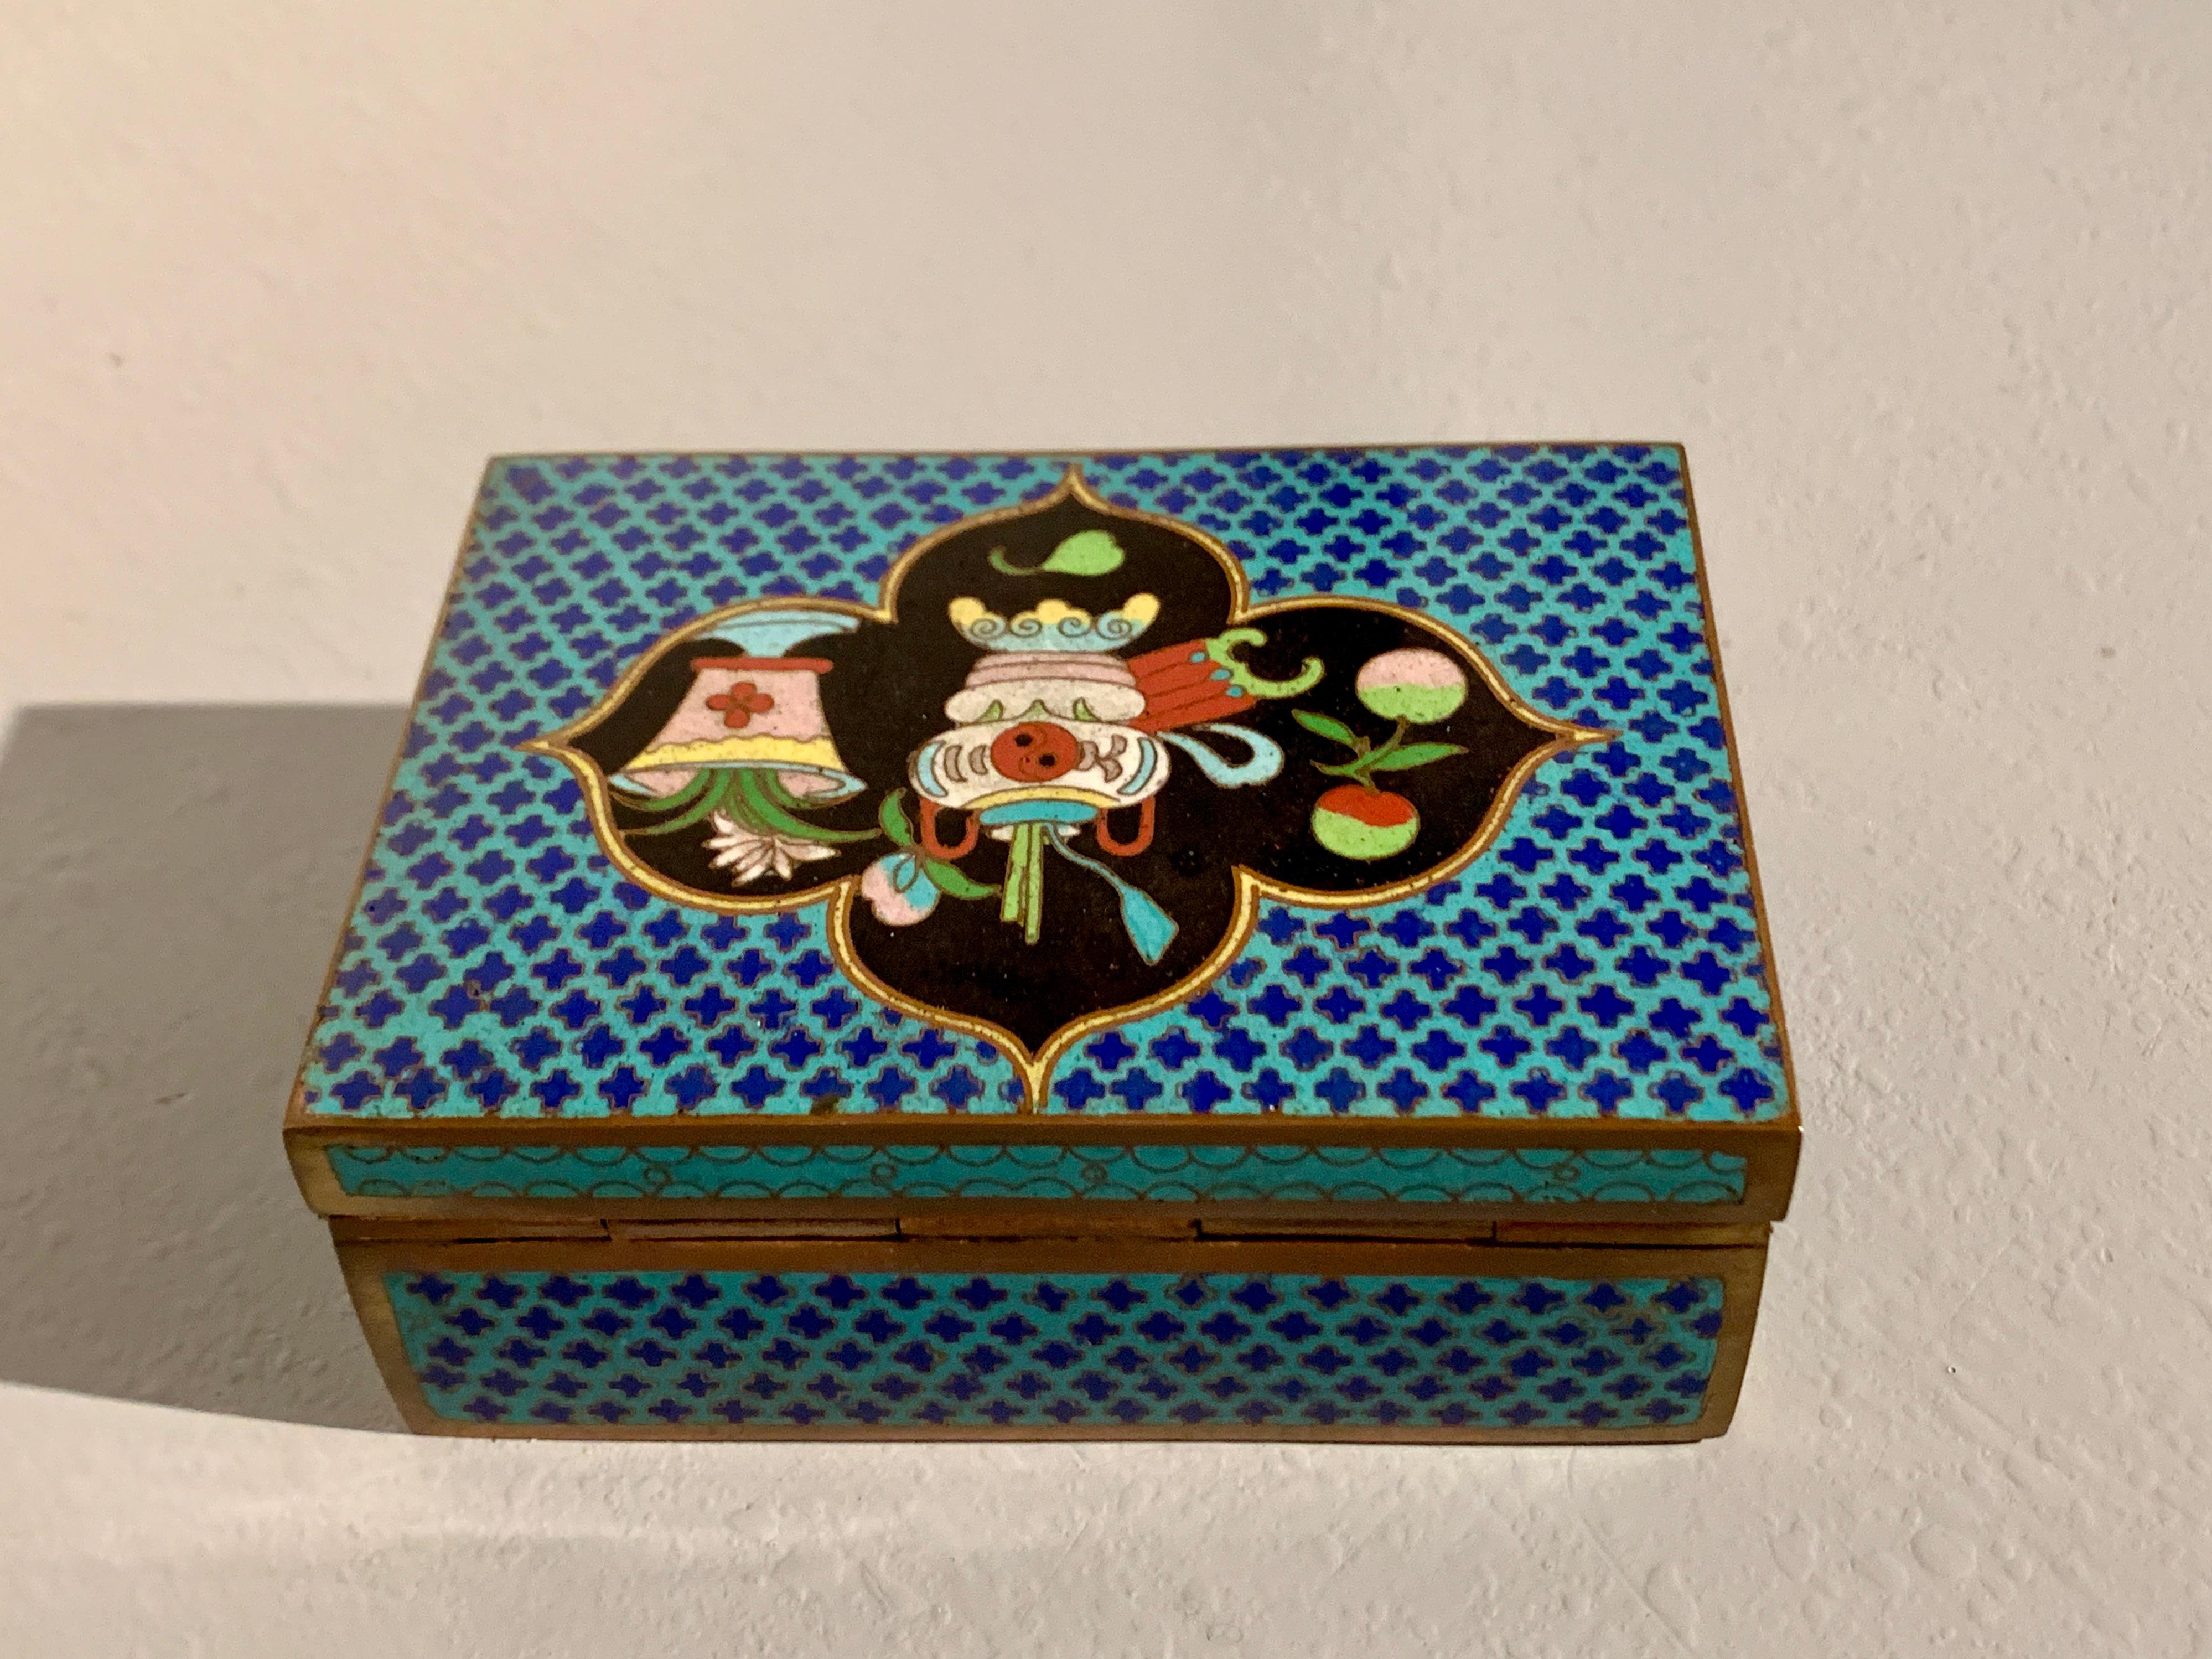 Qing Chinese Turquoise Cloisonne Trinket Box, Republic Period, c 1920, China For Sale